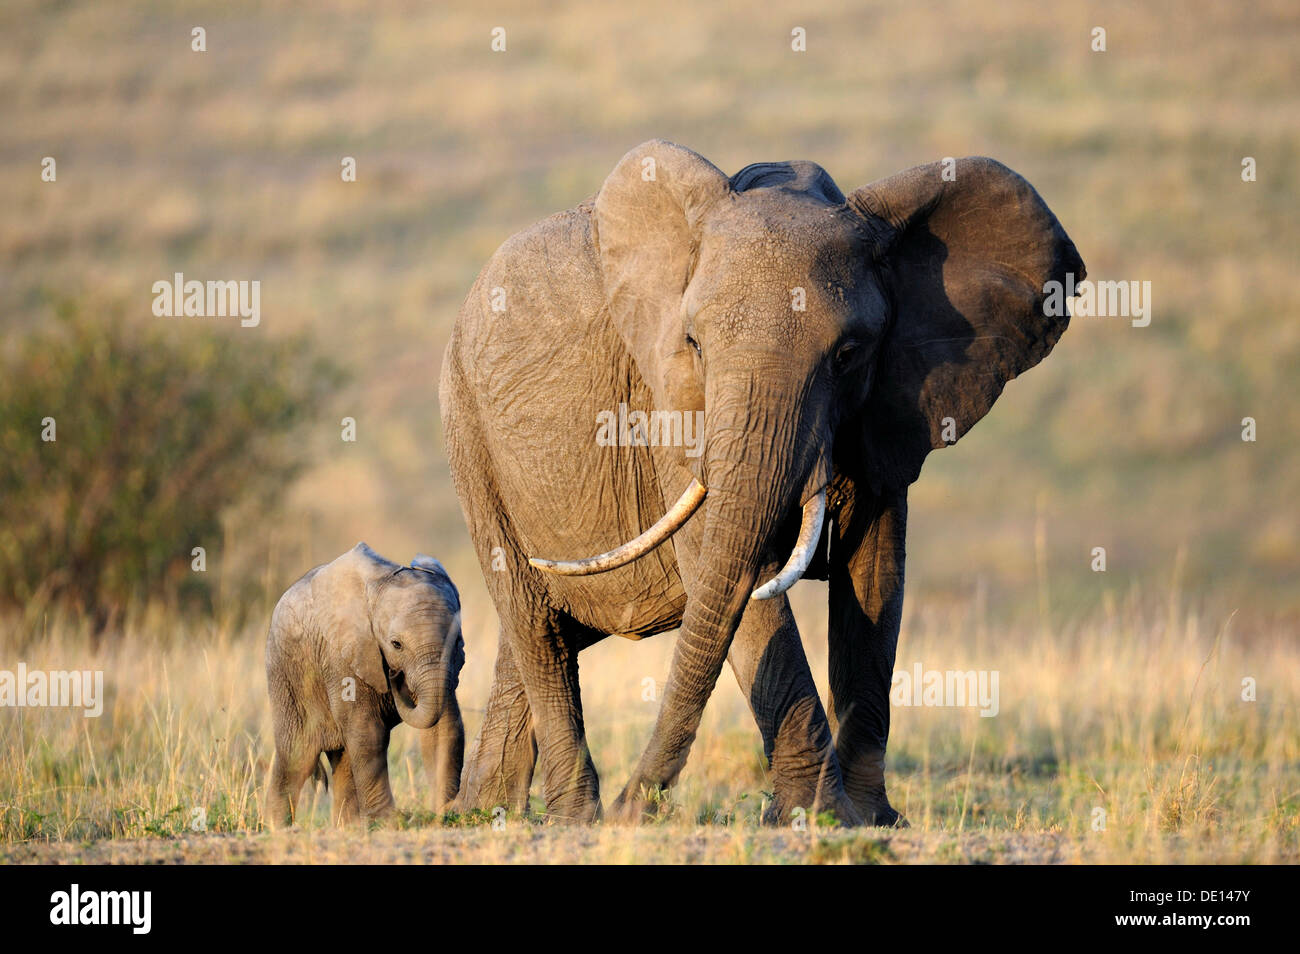 African elephant (Loxodonta africana), cow and calf at the first light of dawn, Masai Mara National Reserve, Kenya, East Africa Stock Photo